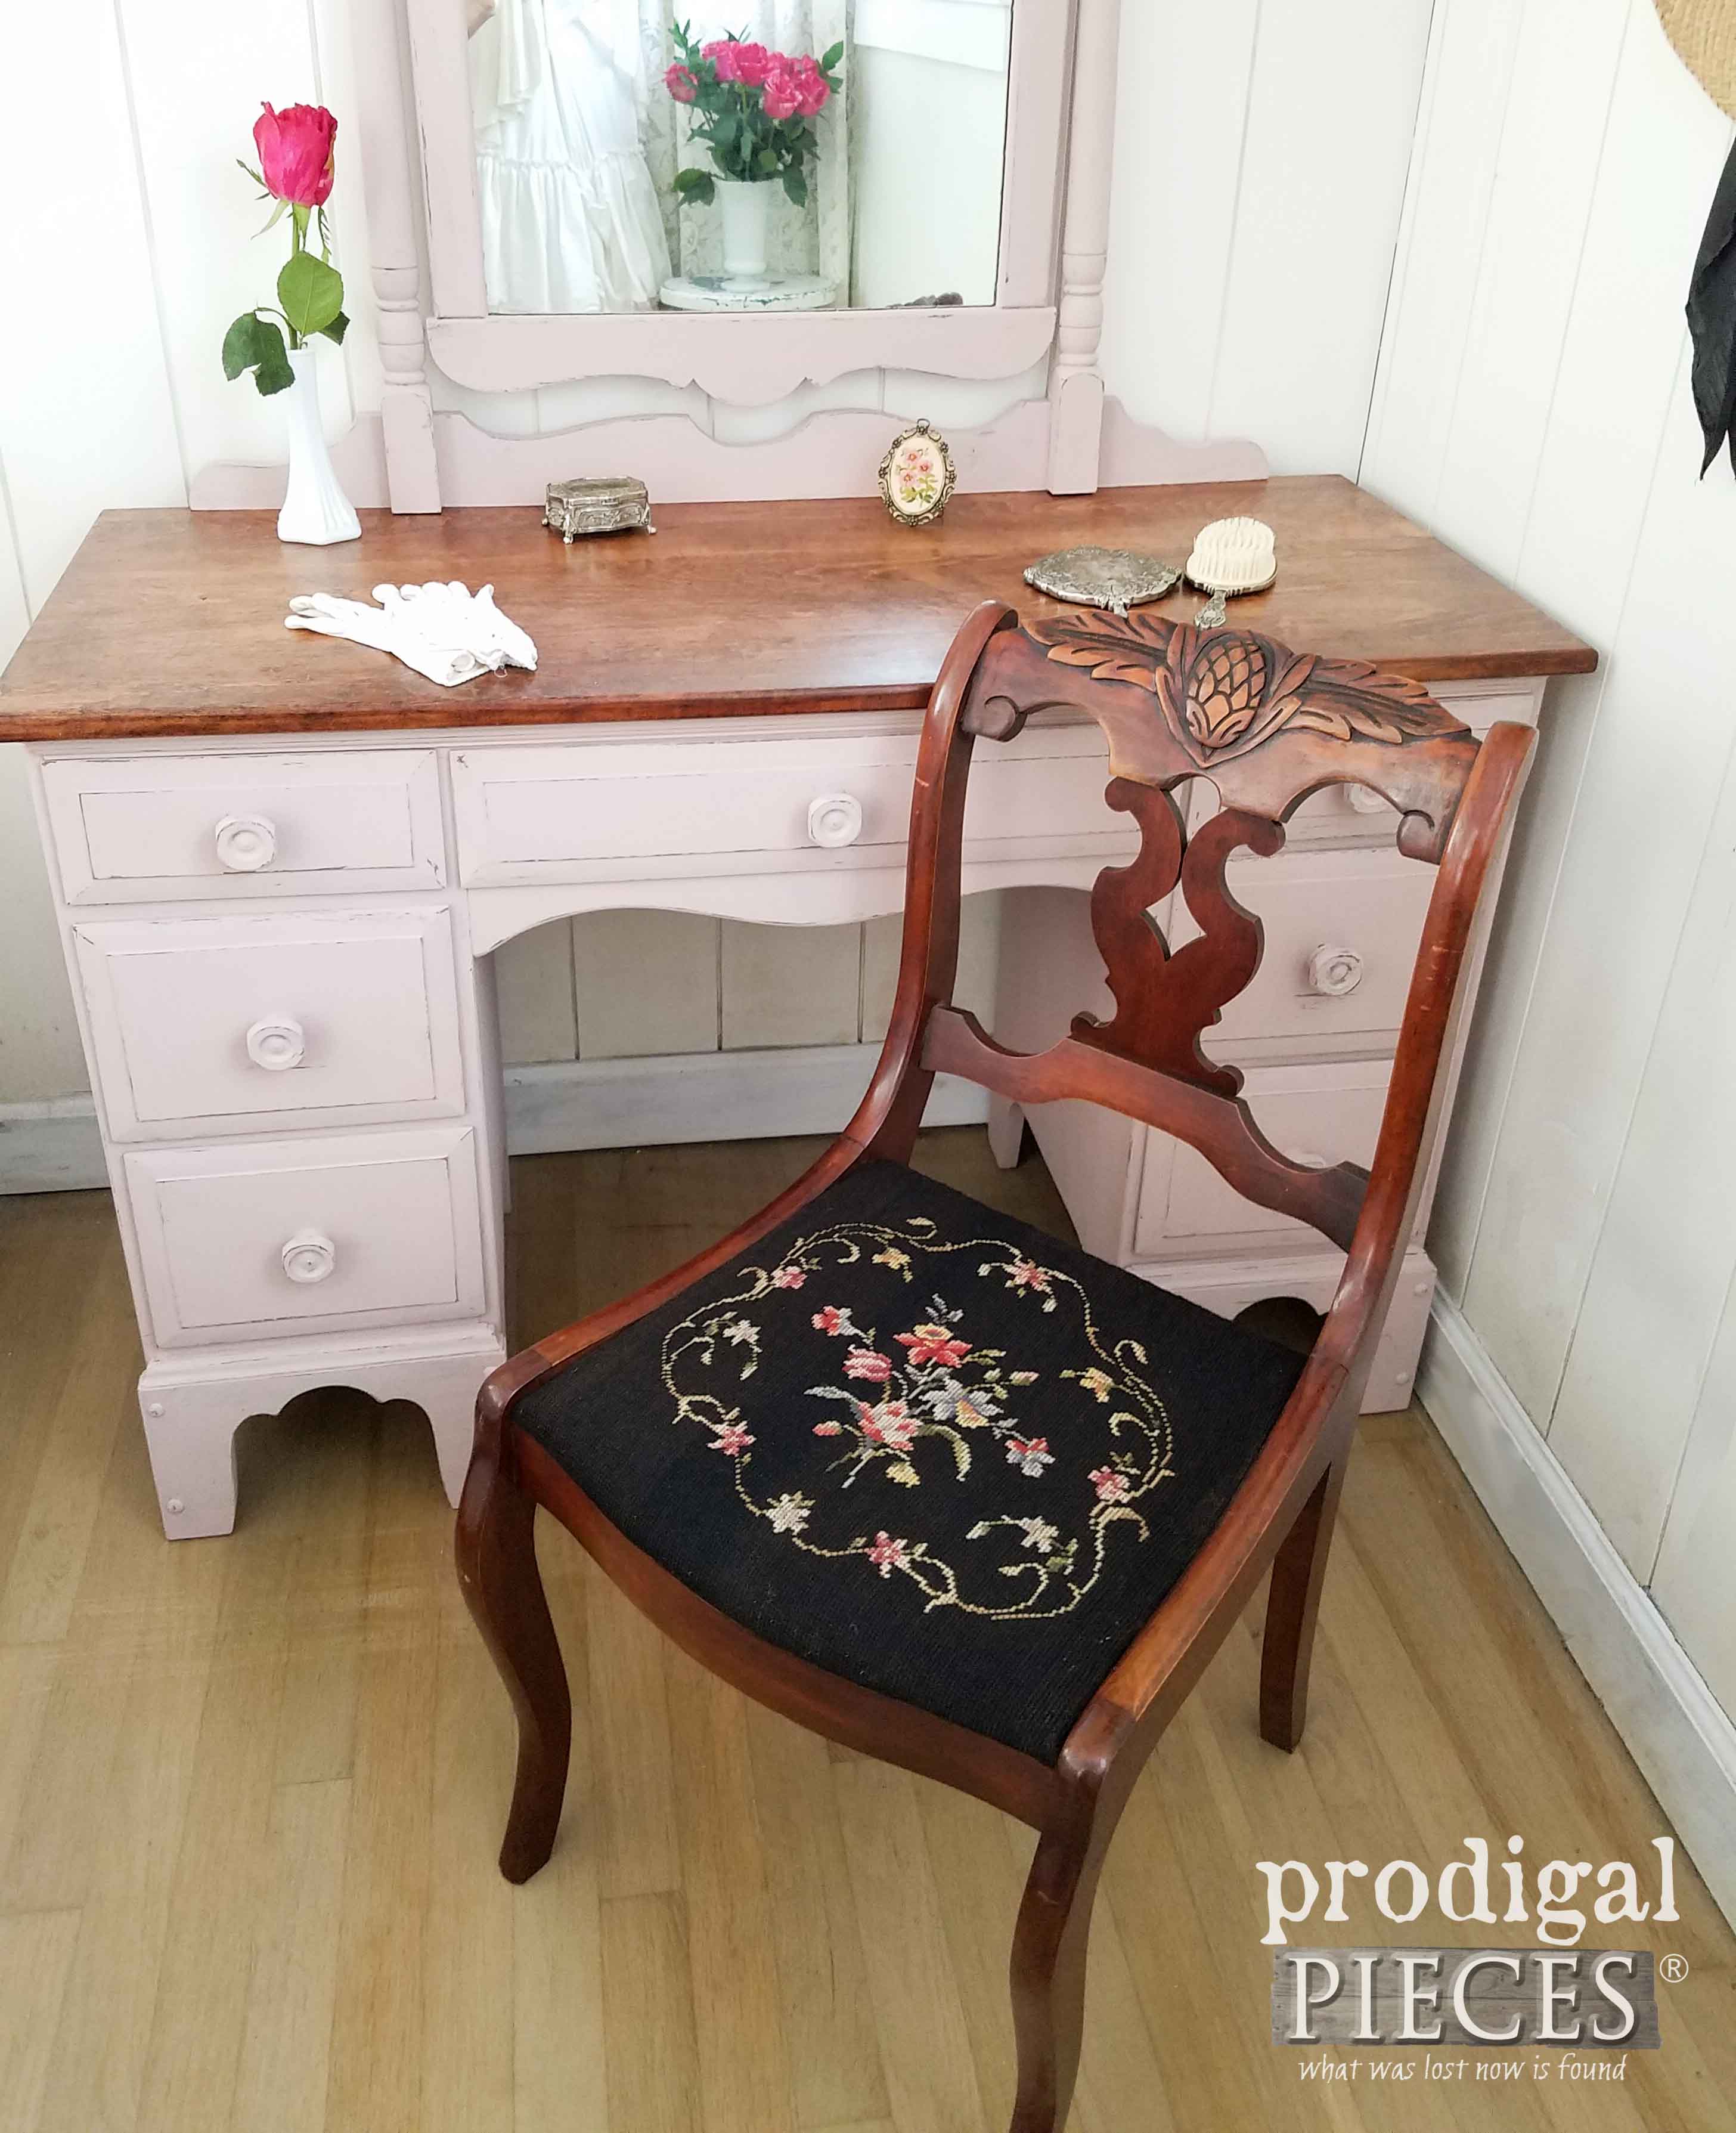 Antique Needlepoint Chair for Vintage Vanity by Prodigal Pieces | prodigalpieces.com